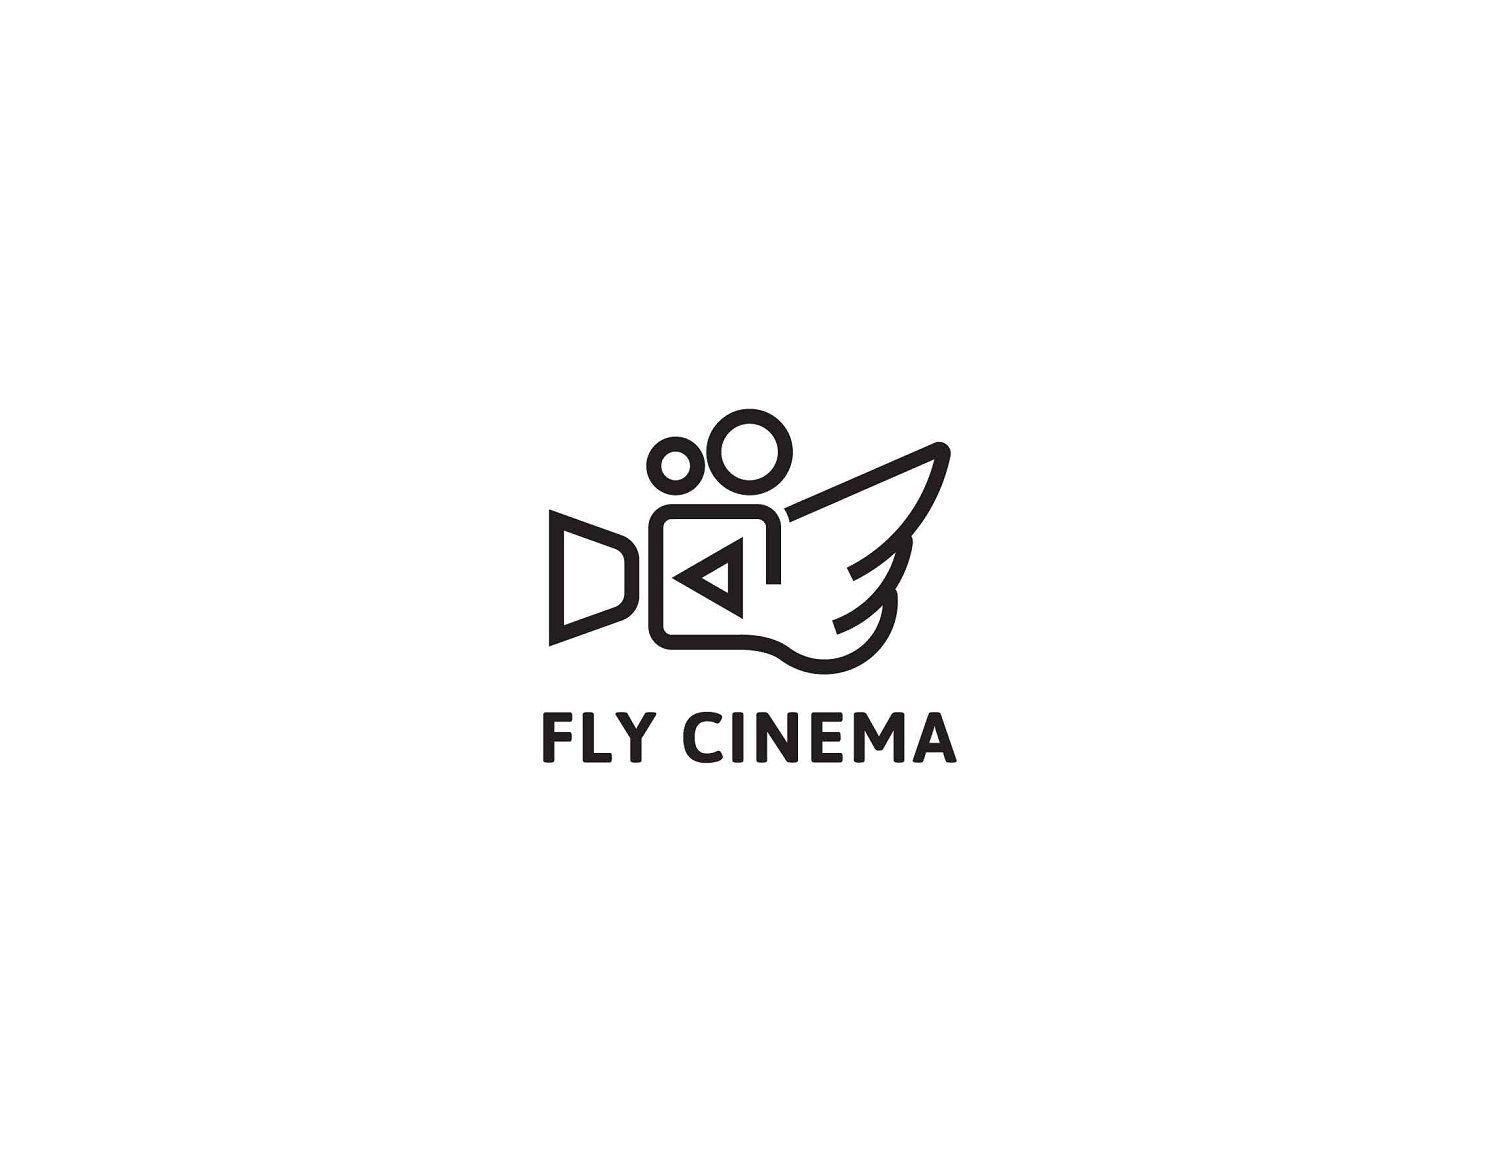 Film Production Logo - Traditional, Masculine, Film Production Logo Design for Fly Cinema